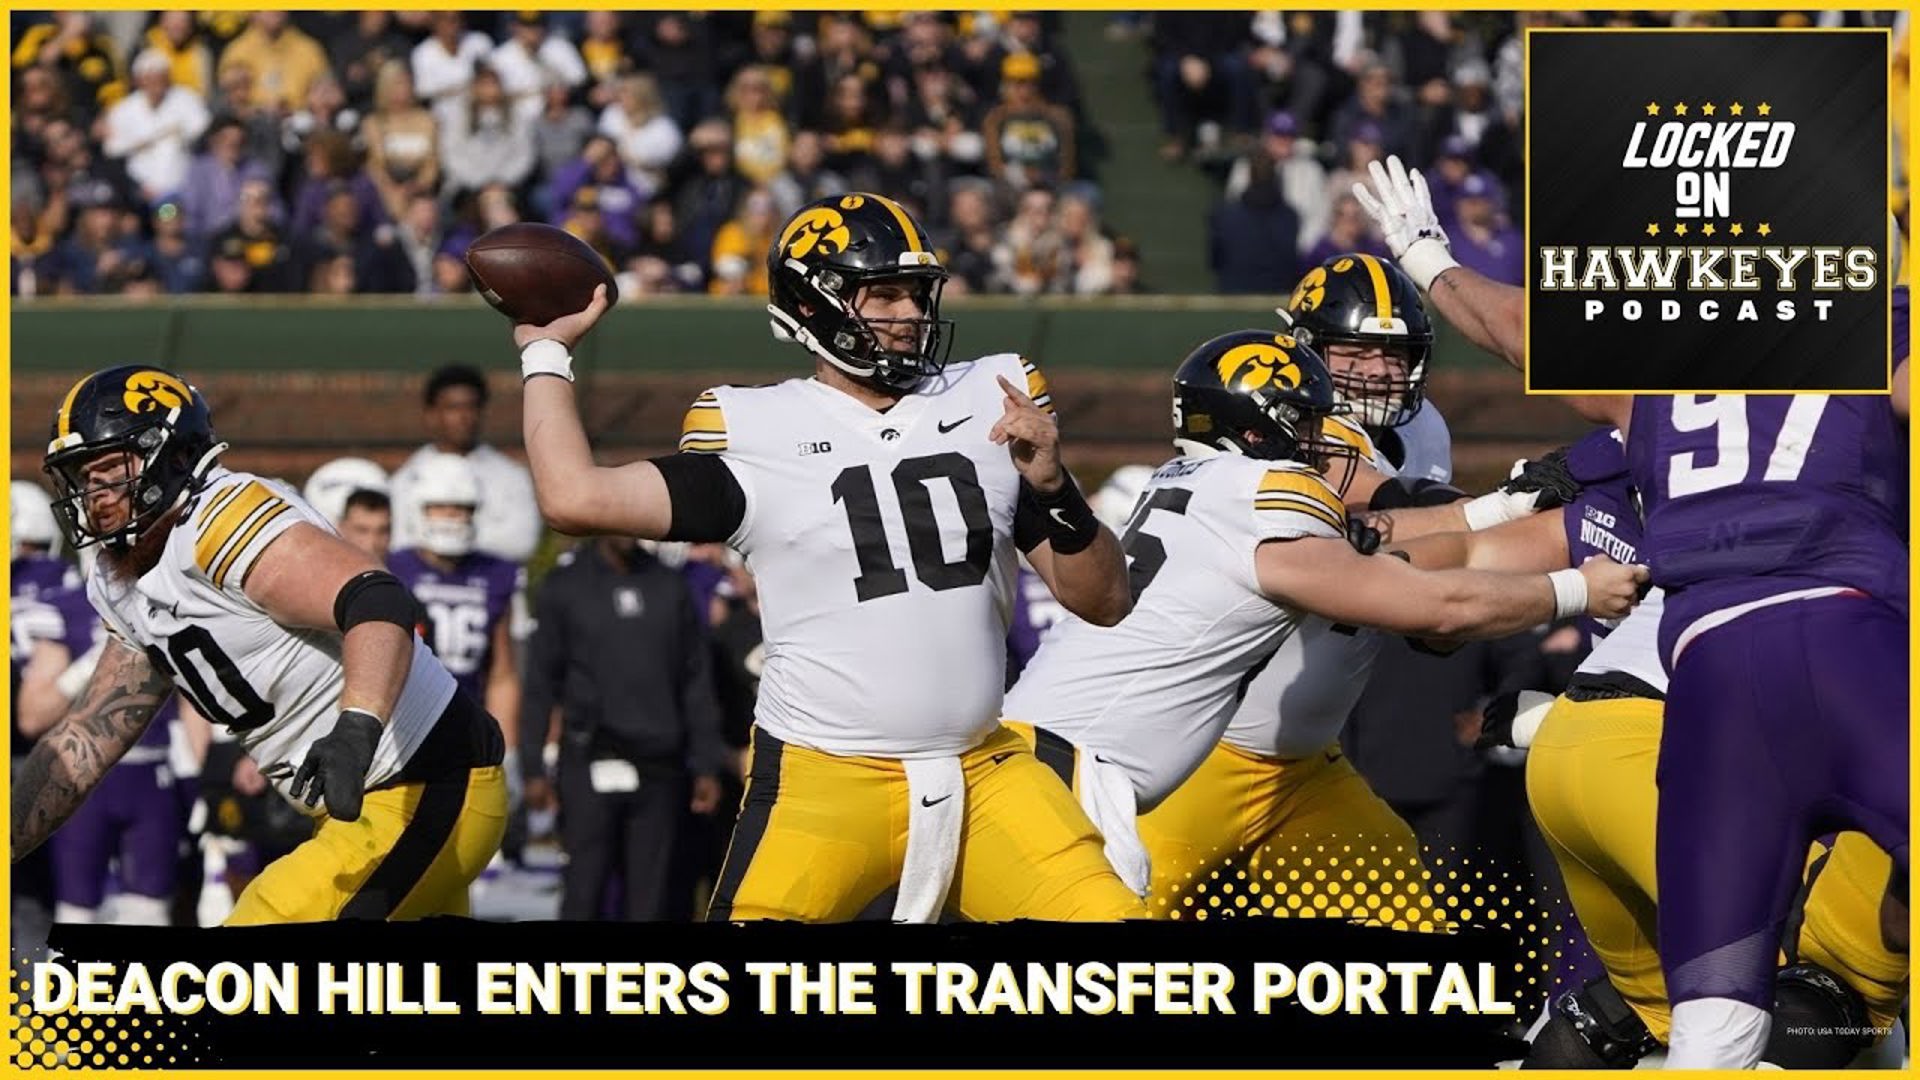 Iowa Football: Deacon Hill enters the transfer portal, what's next at QB for the Hawkeyes?